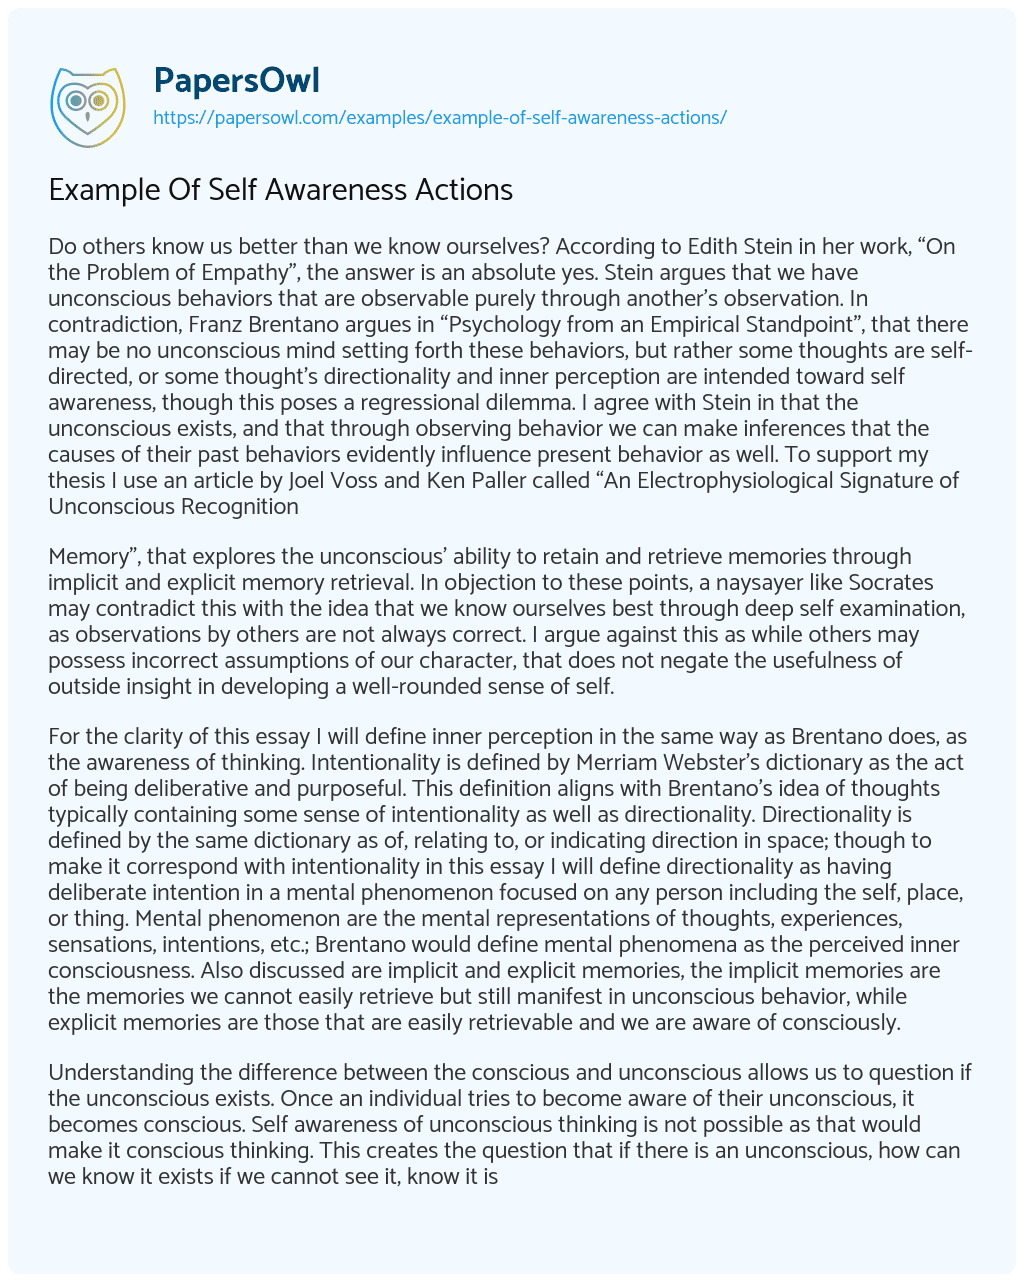 Essay on Example of Self Awareness Actions